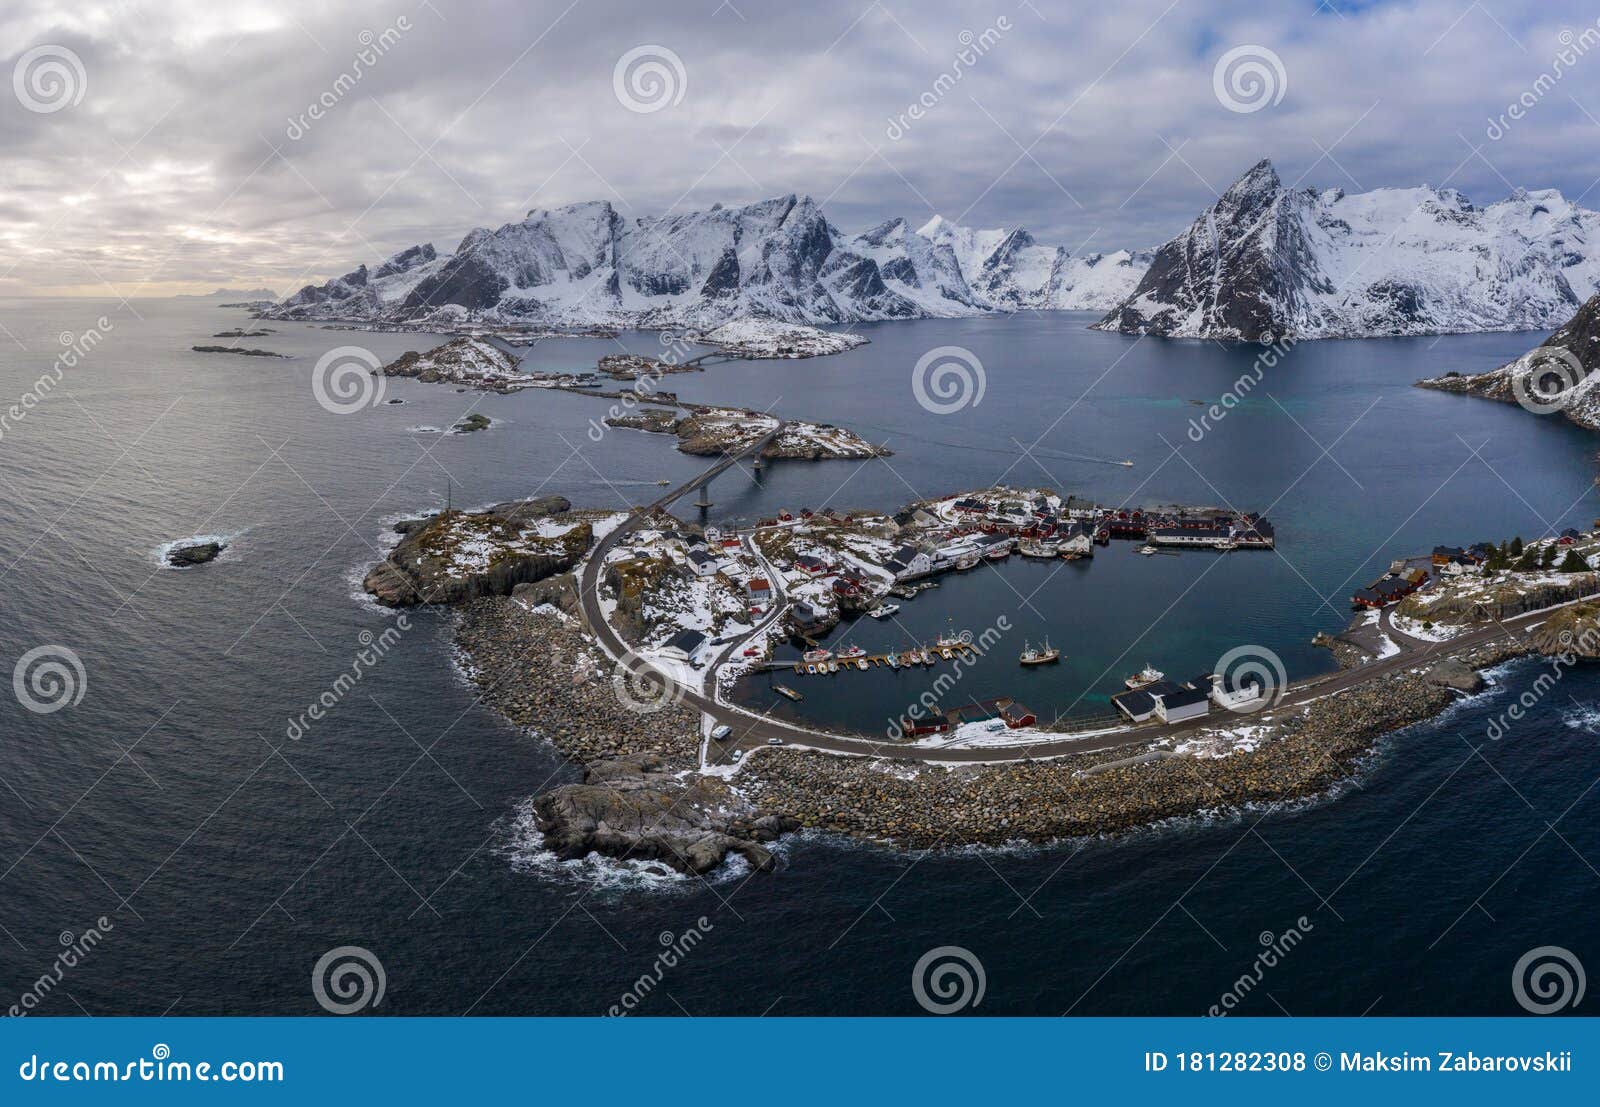 hamnoy village and mountains in winter. norwegian sea and stormy sky. moskenes, lofoten islands, norway. aerial view